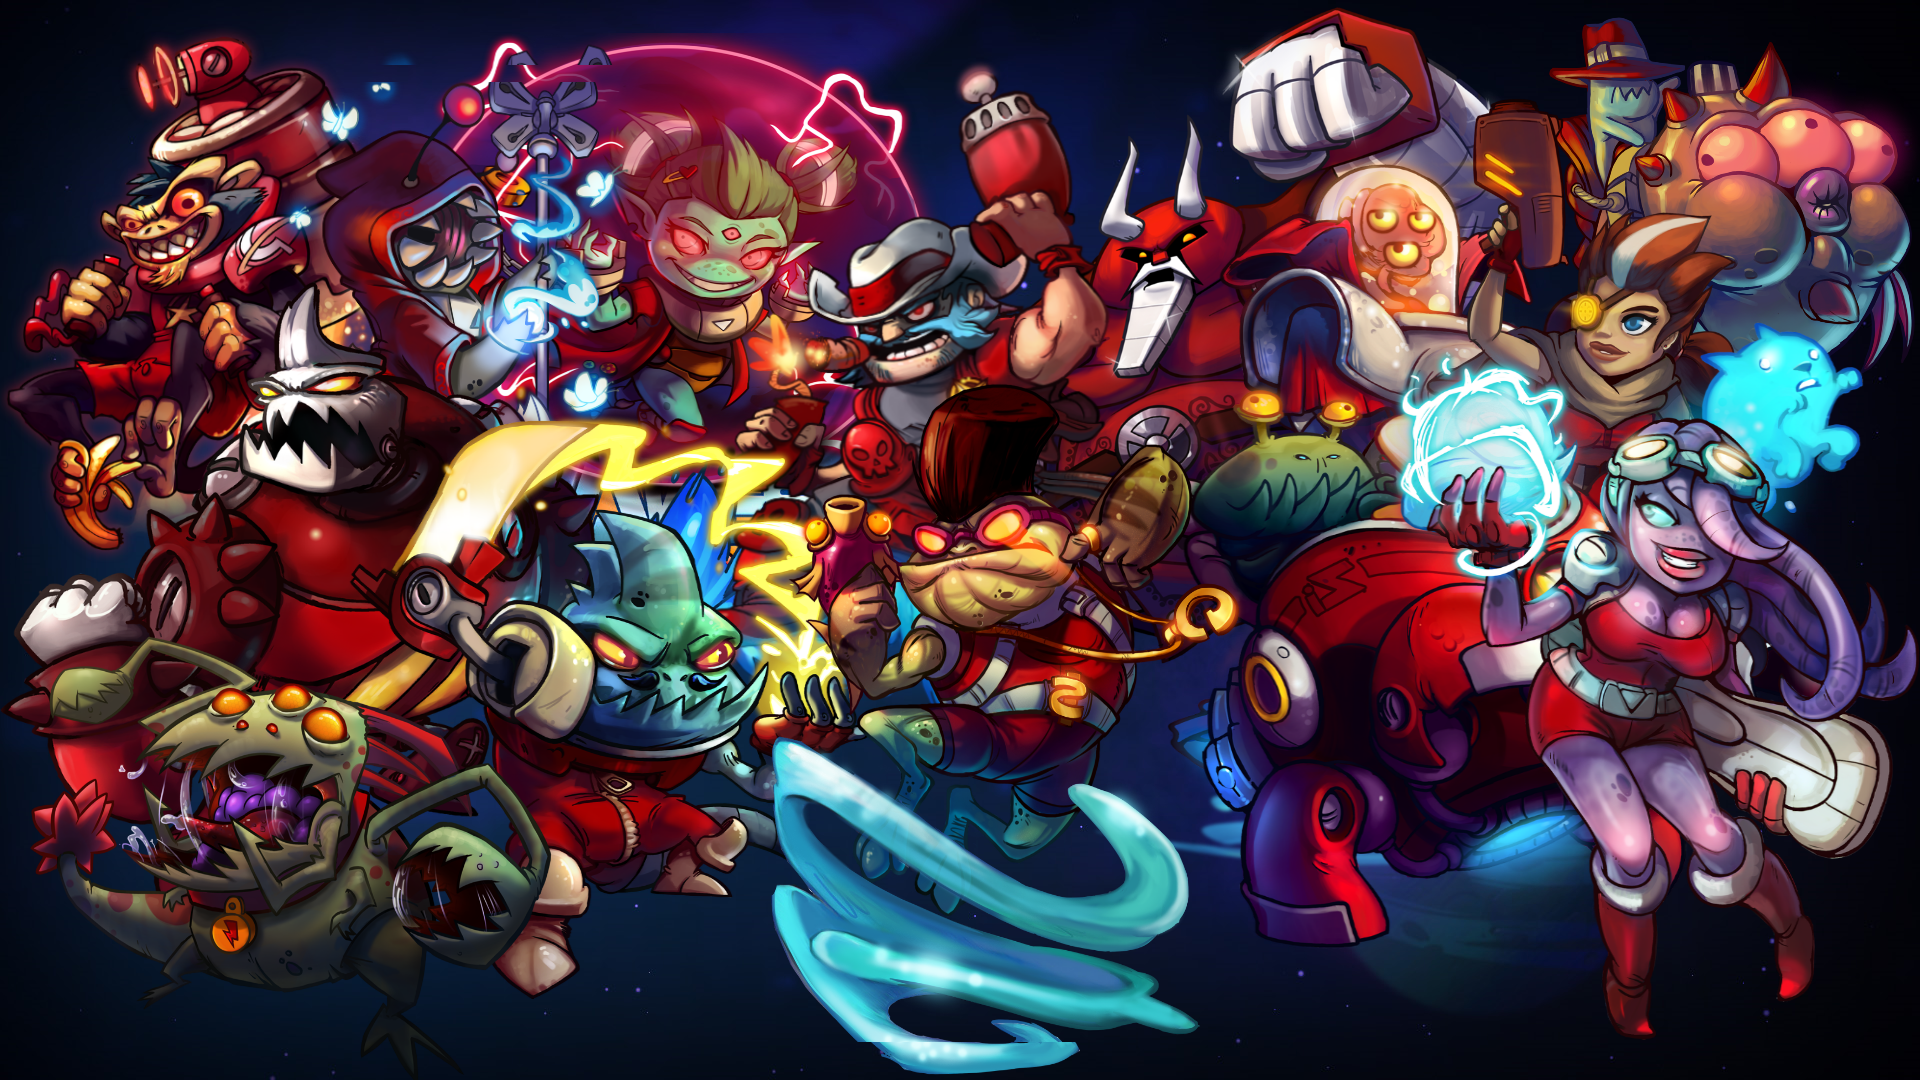 Steam Munity Awesomenauts Wallpaper Now With Ayla